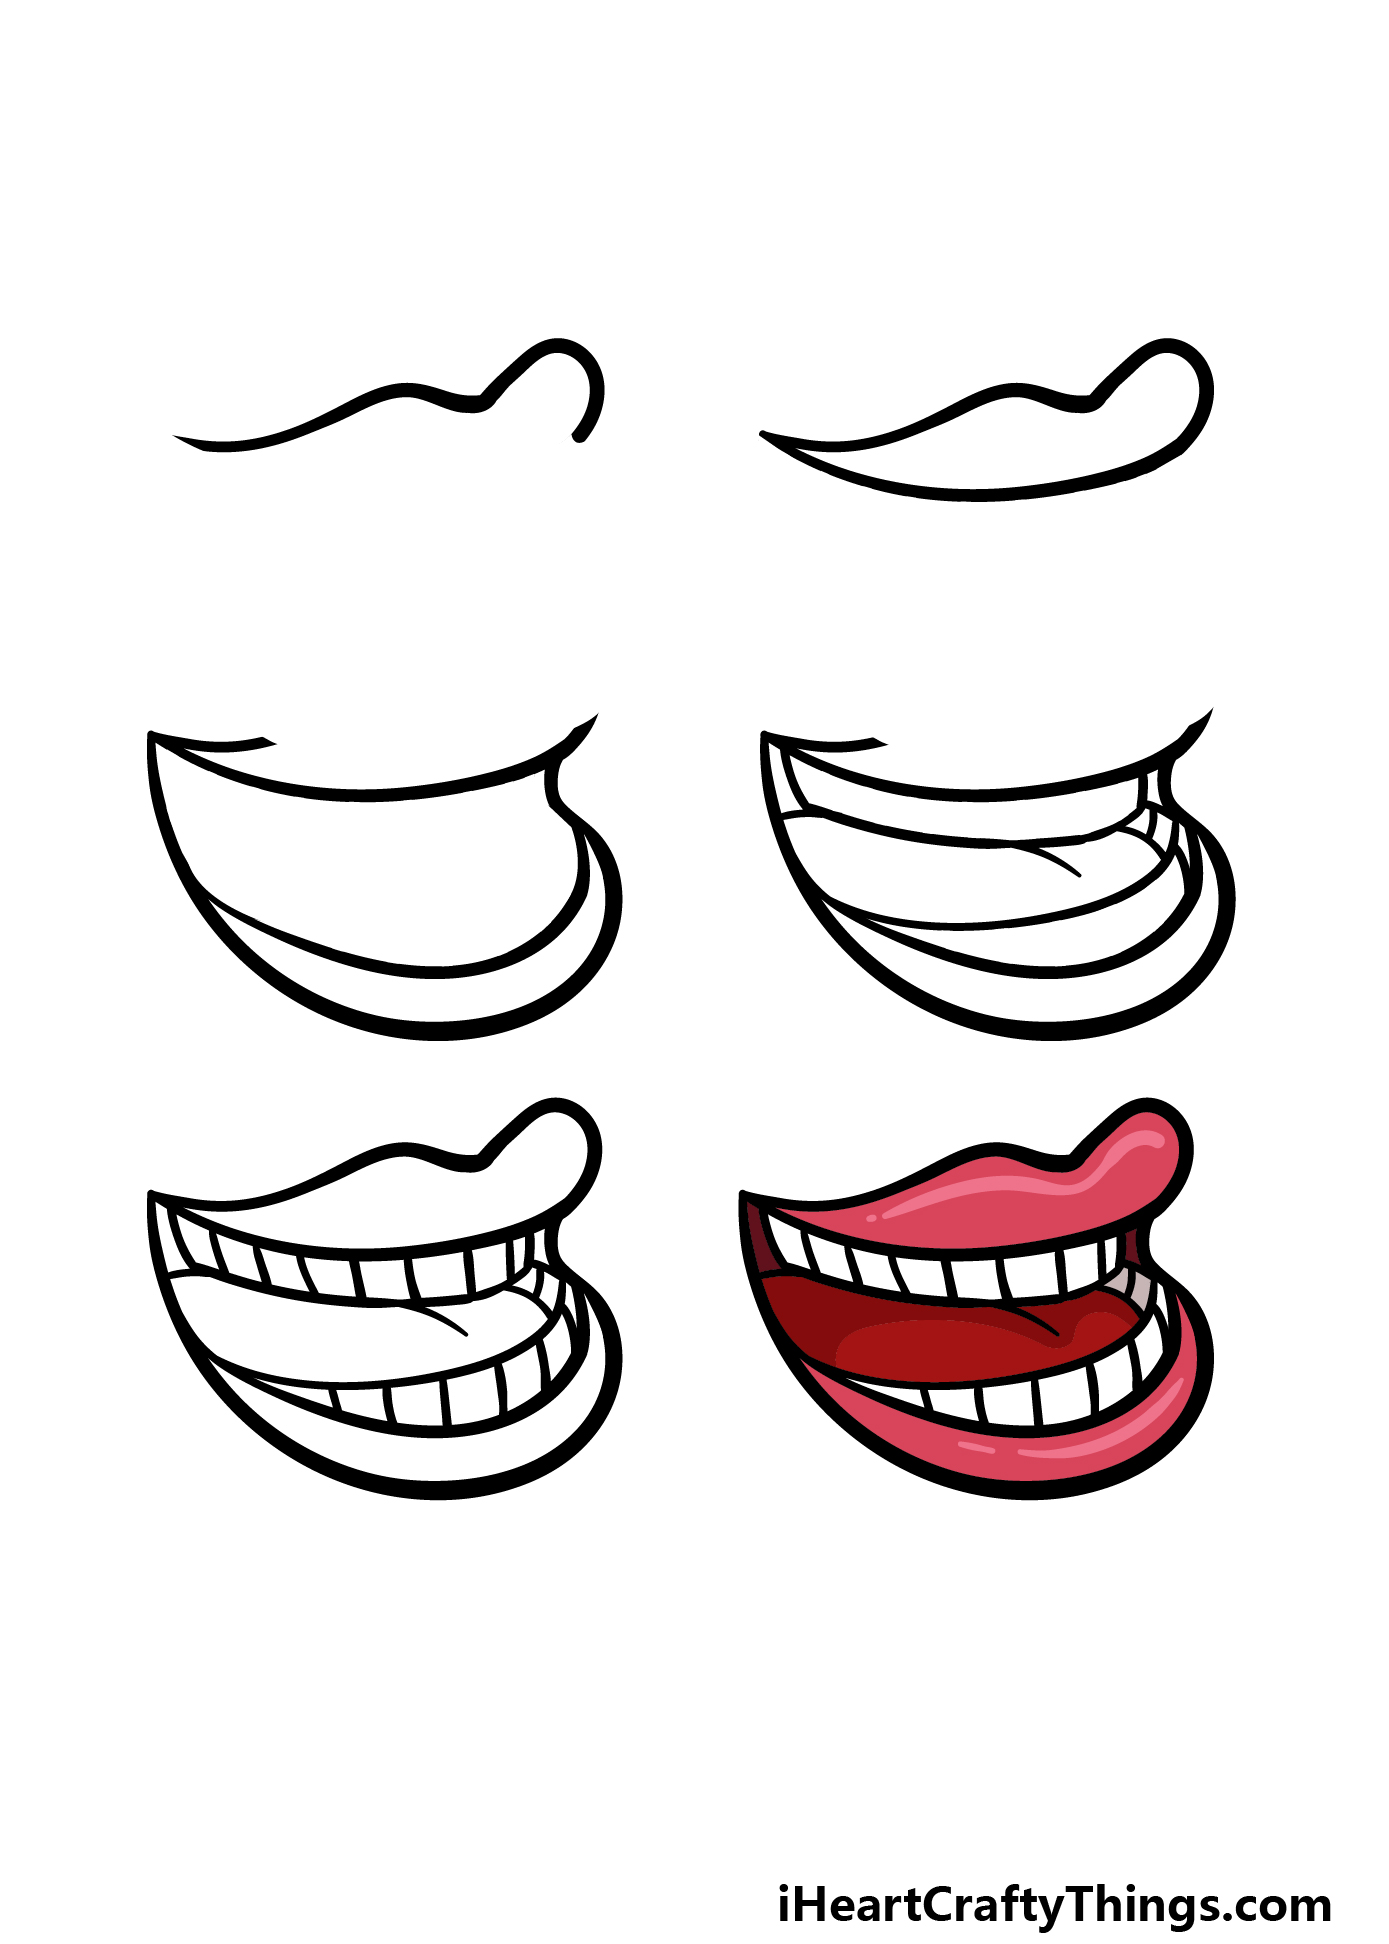 how to draw a cartoon mouth in 6 steps